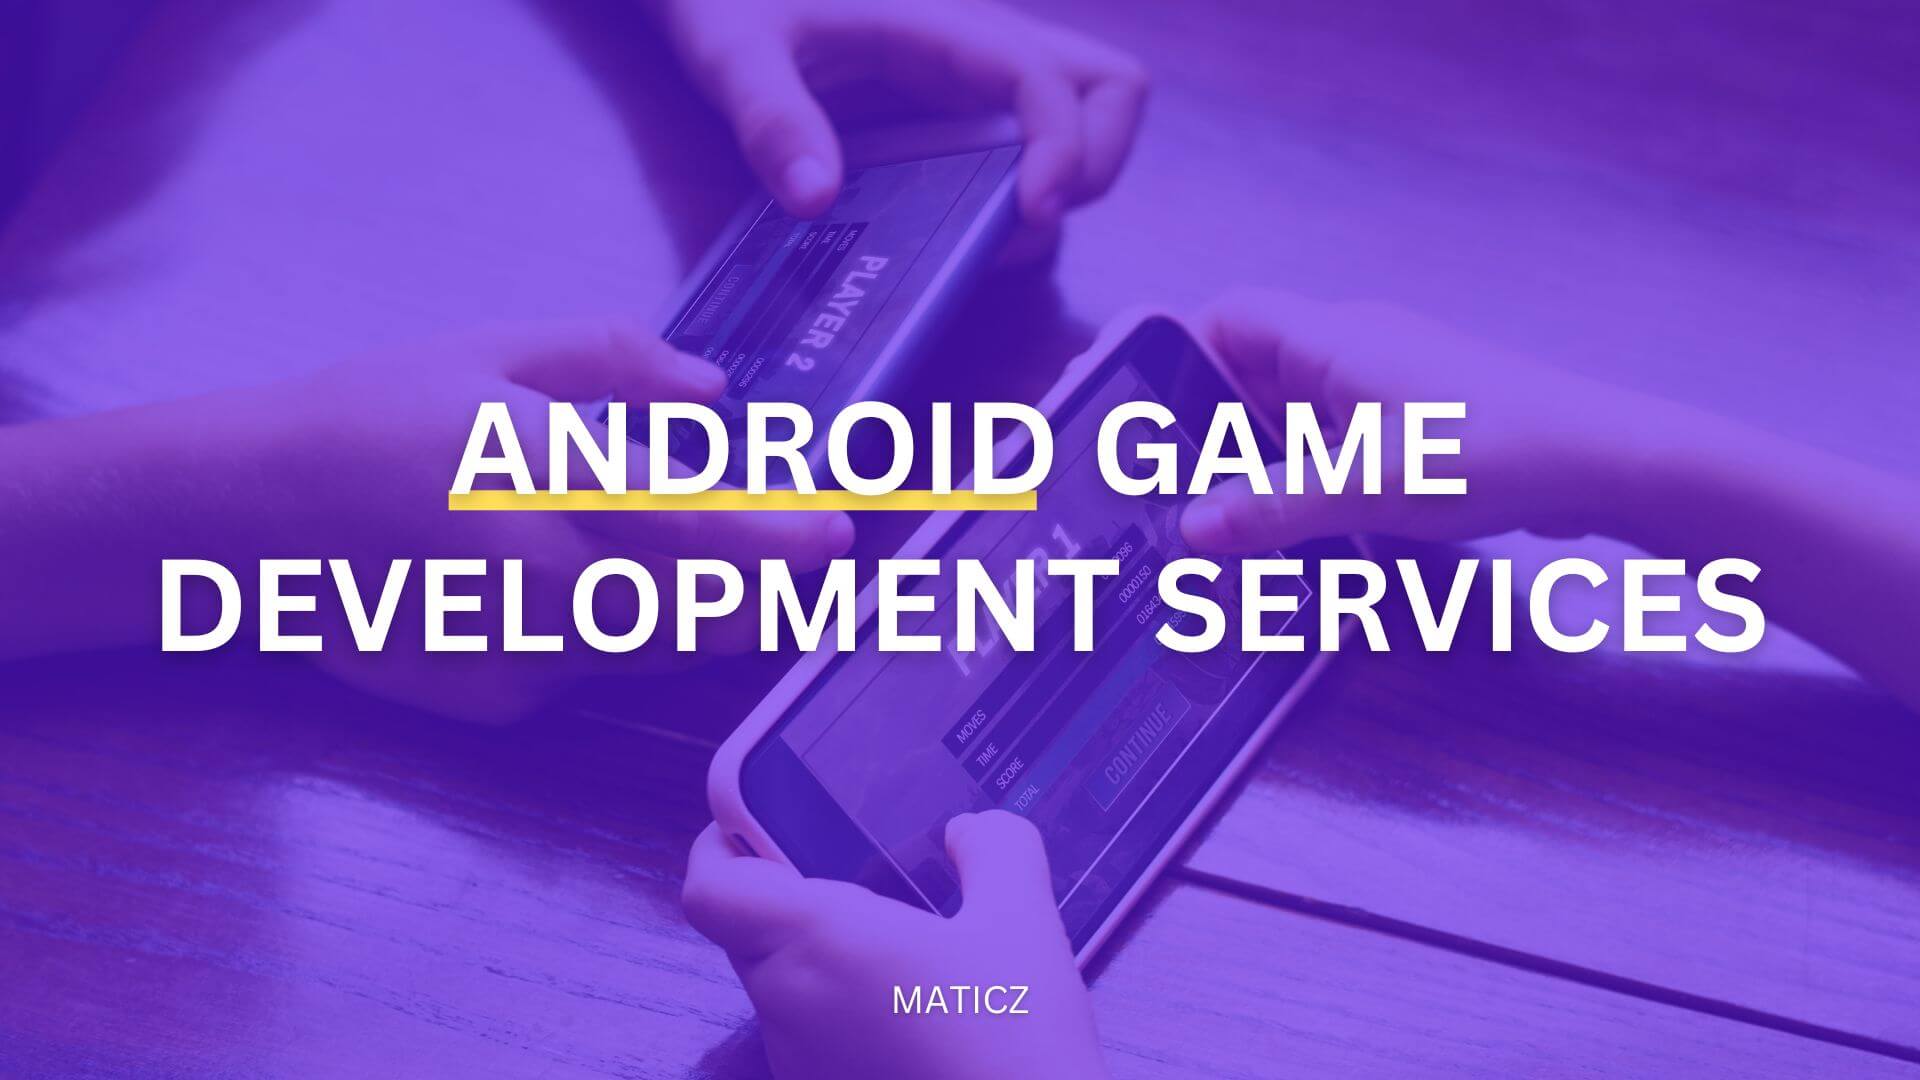 Android Game Development Company | Android Game Developers